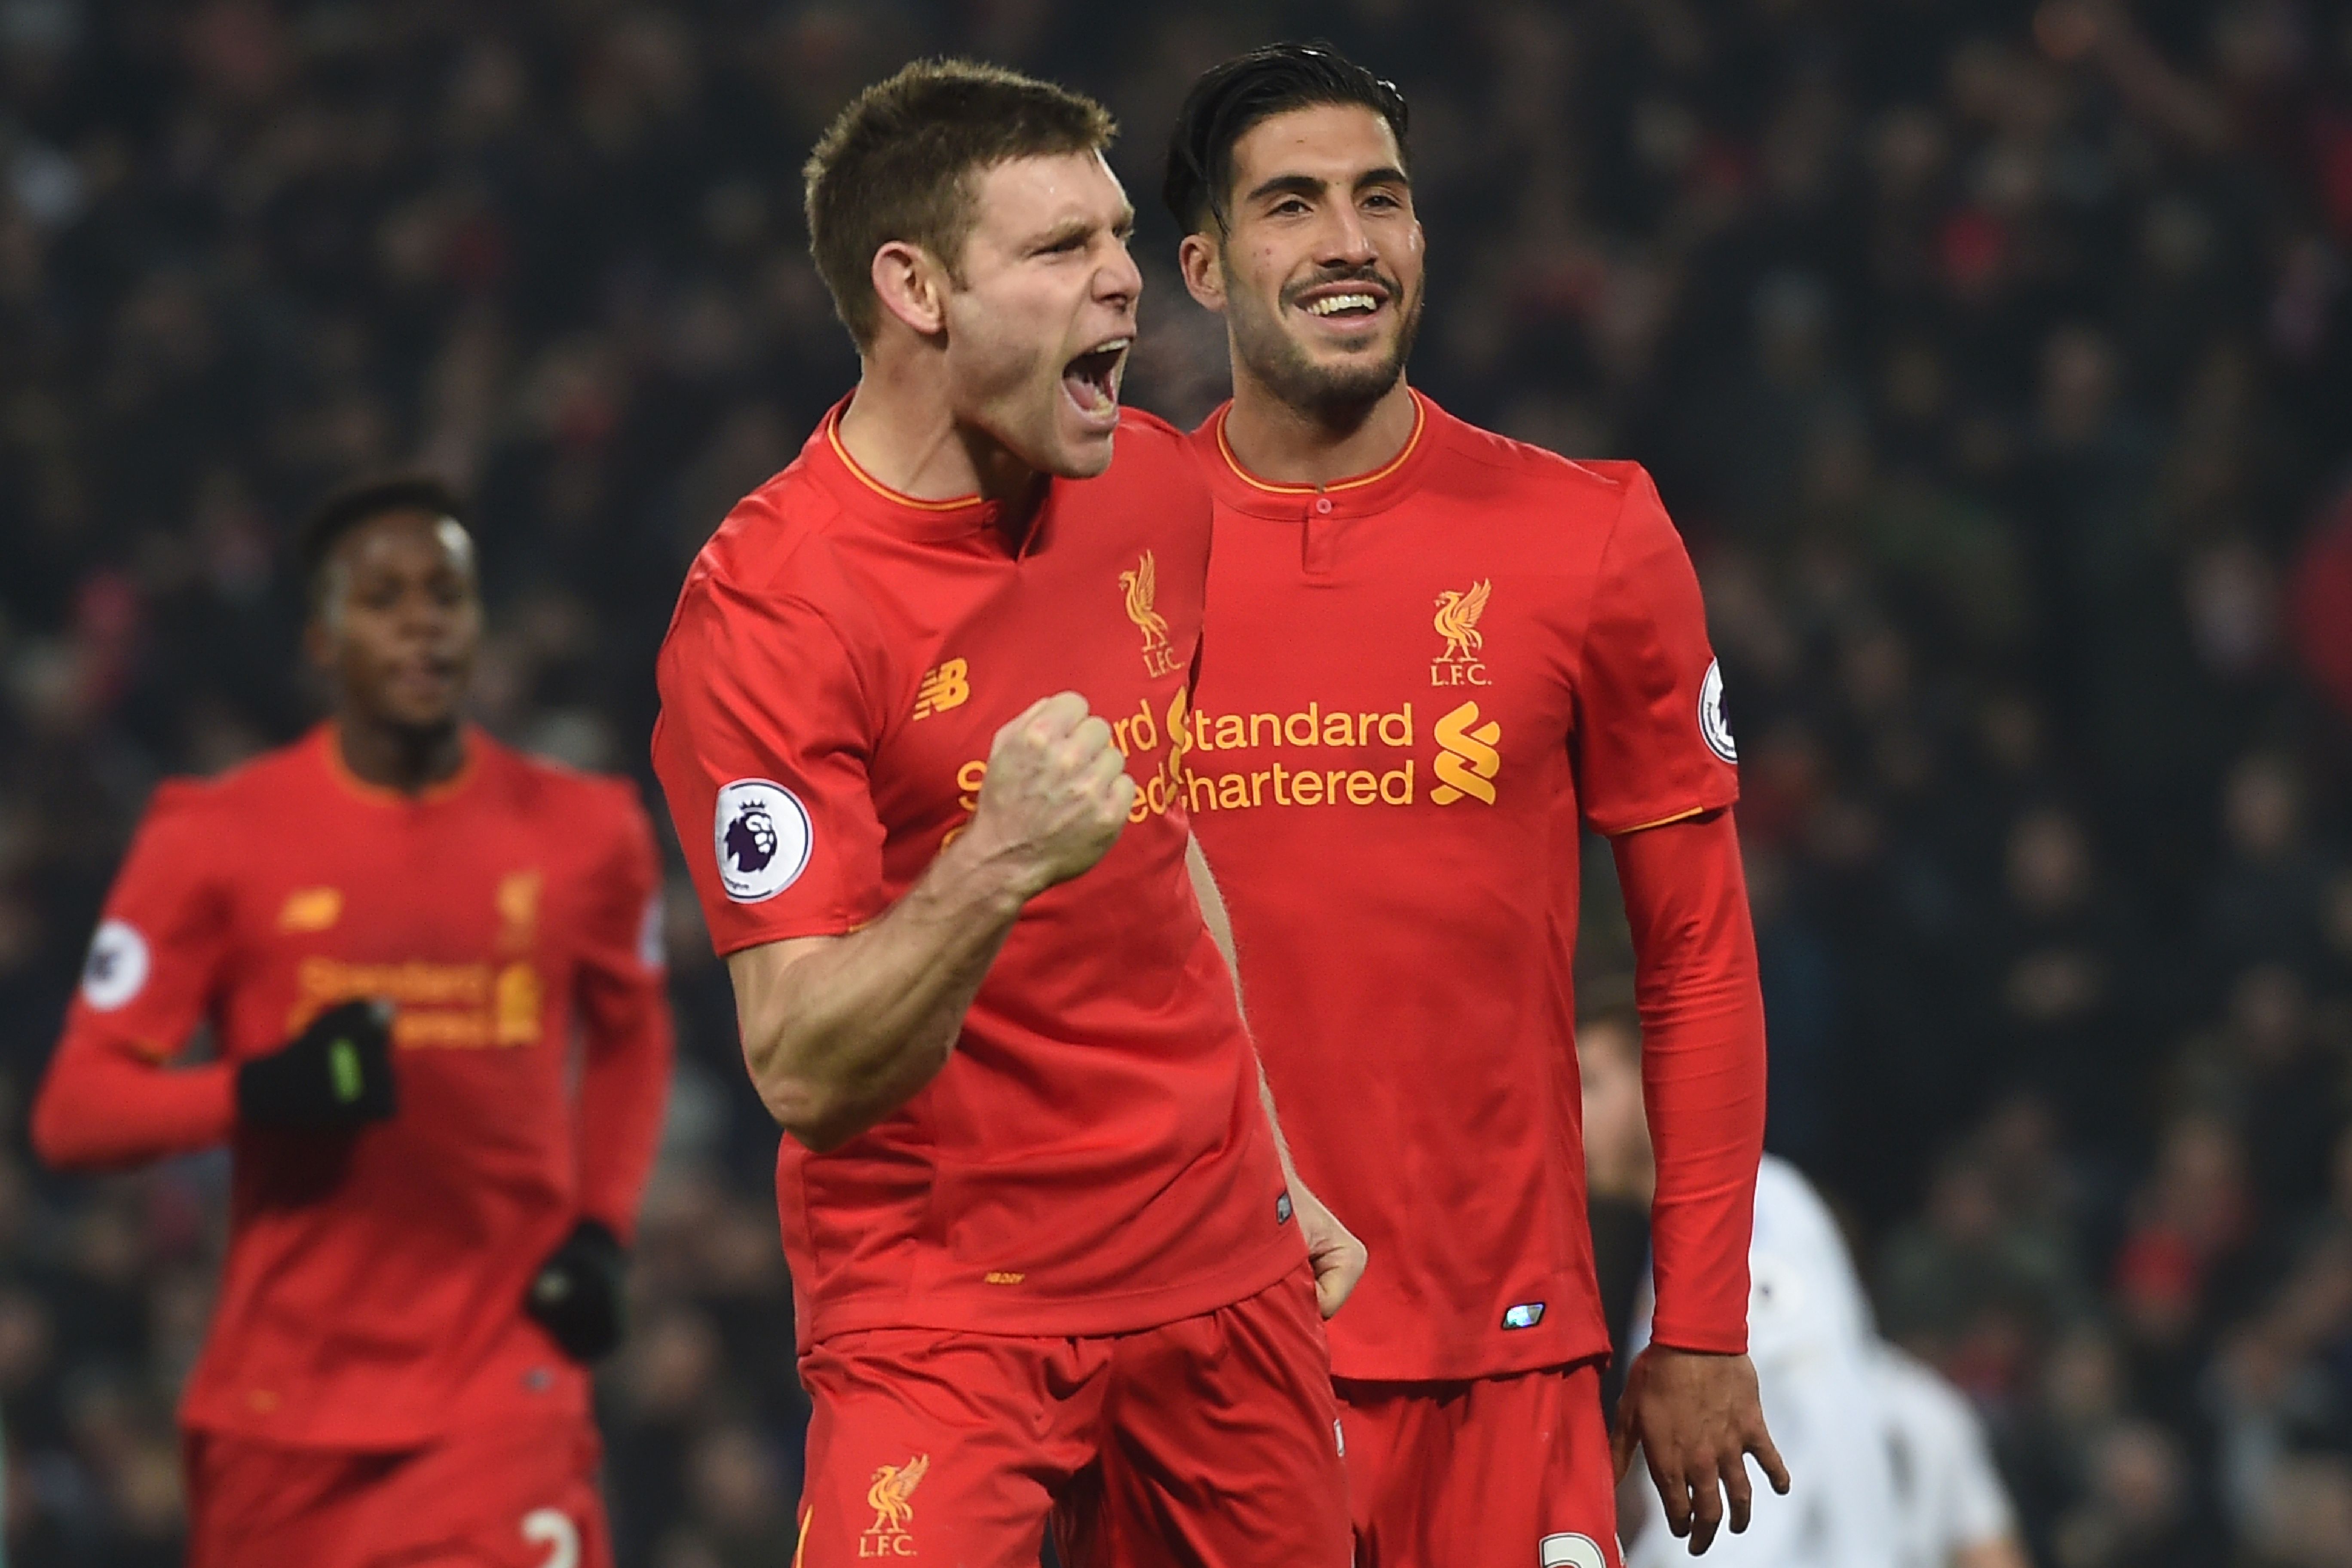 Liverpool's English midfielder James Milner (L) celebrates after scoring their second goal from the penalty spot with Liverpool's German midfielder Emre Can (R) during the English Premier League football match between Liverpool and Sunderland at Anfield in Liverpool, north west England on November 26, 2016. / AFP / Paul ELLIS / RESTRICTED TO EDITORIAL USE. No use with unauthorized audio, video, data, fixture lists, club/league logos or 'live' services. Online in-match use limited to 75 images, no video emulation. No use in betting, games or single club/league/player publications.  /         (Photo credit should read PAUL ELLIS/AFP/Getty Images)